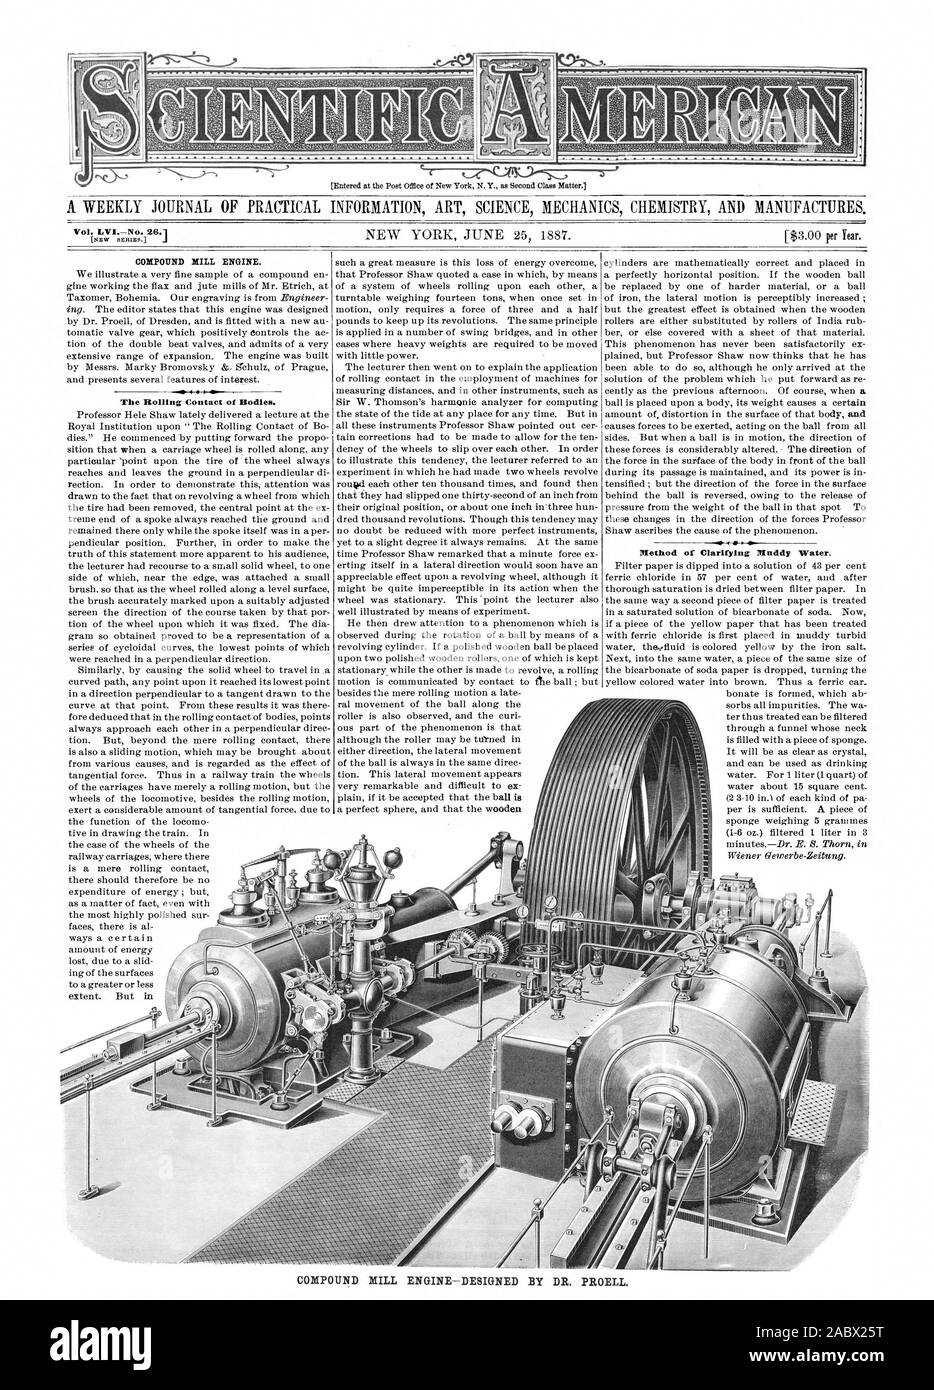 COMPOUND MILL ENGINE. The Rolling Contact of Bodies. Method of Clarifying Muddy Water. COMPOUND MILL ENGINE—DESIGNED BY DR. PROELL., scientific american, 1887-06-25 Stock Photo